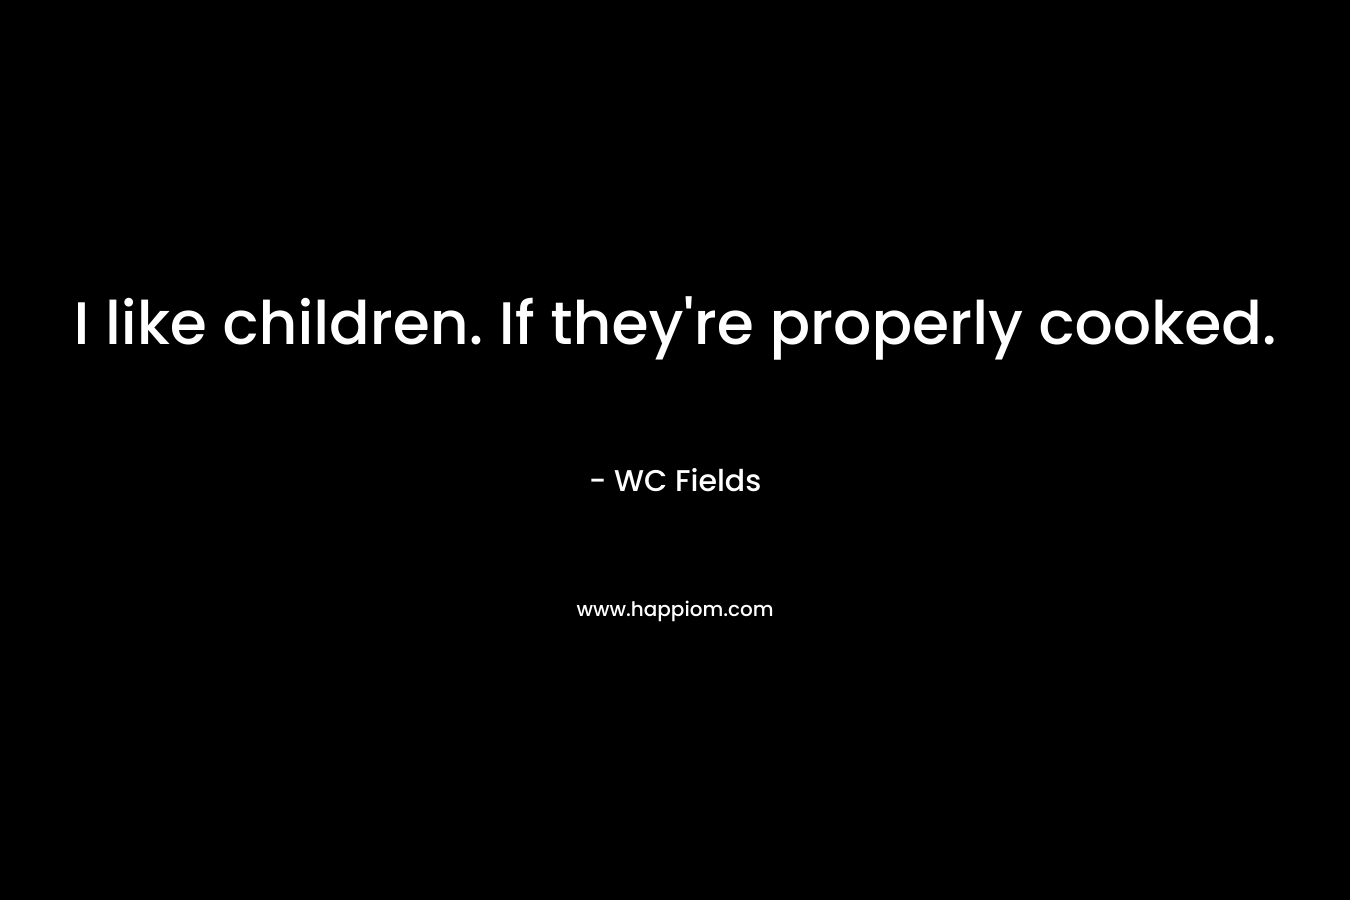 I like children. If they're properly cooked.